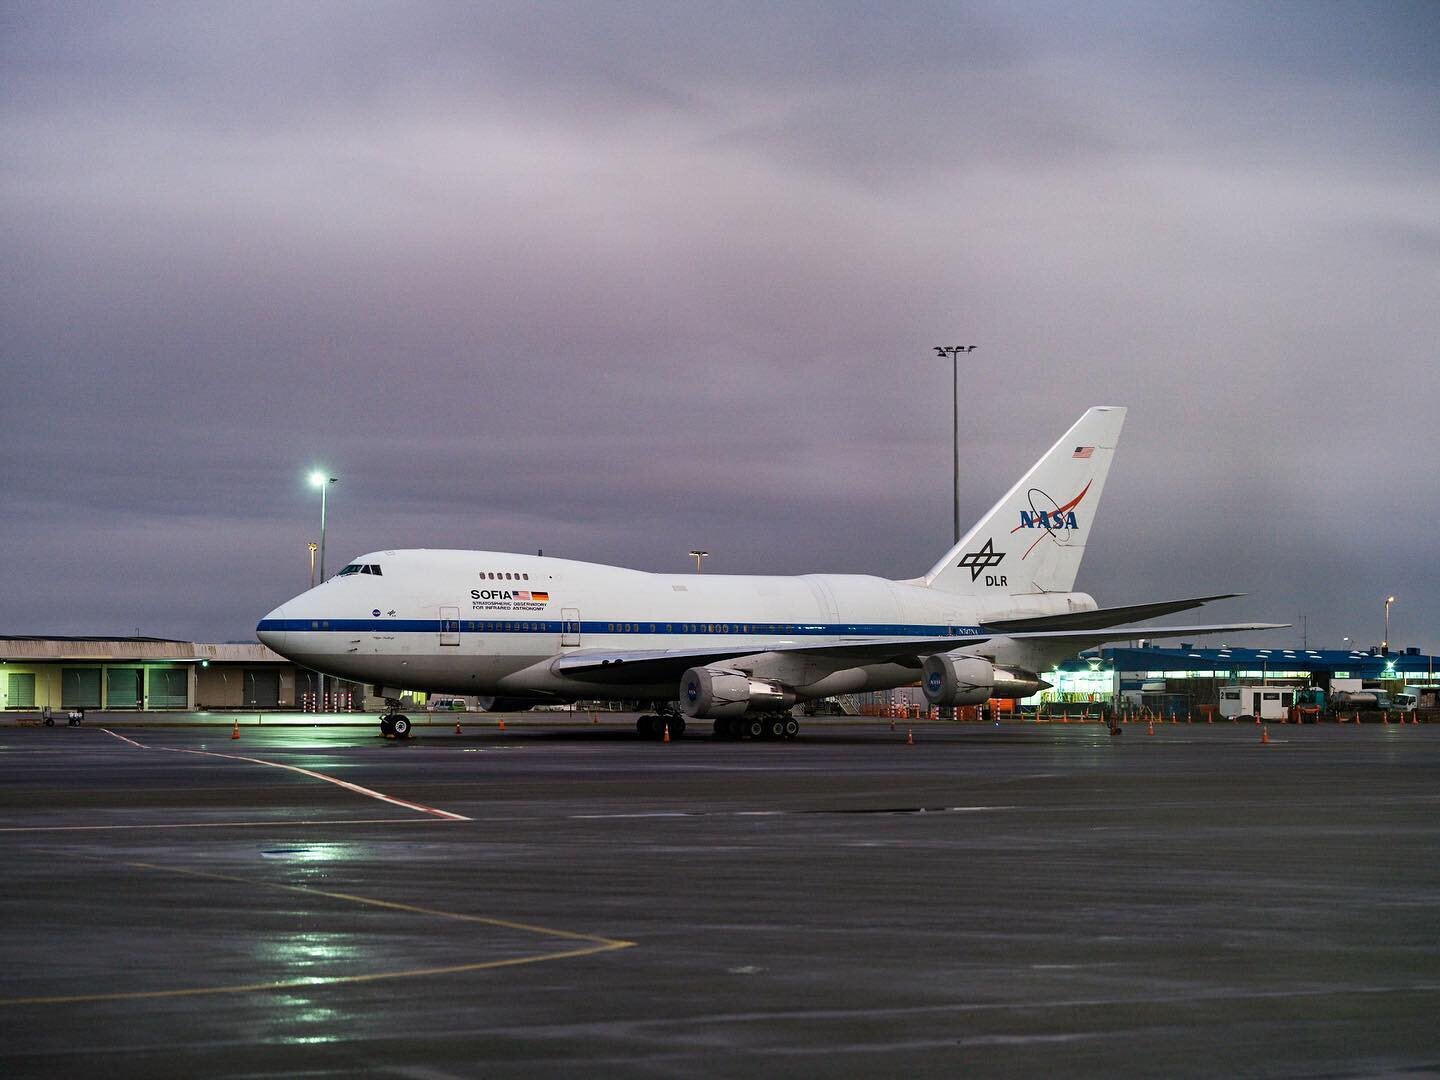 We caught a glimpse of NASAs @sofiatelescope making its seventh and final visit to New Zealand to observe the Southern Hemisphere.
.
.
.
.
.
@nasa #infrareduniverse #cosmicmagneticfields #astronomy #telescope #infrared #christchurch #nasa #palebluedo